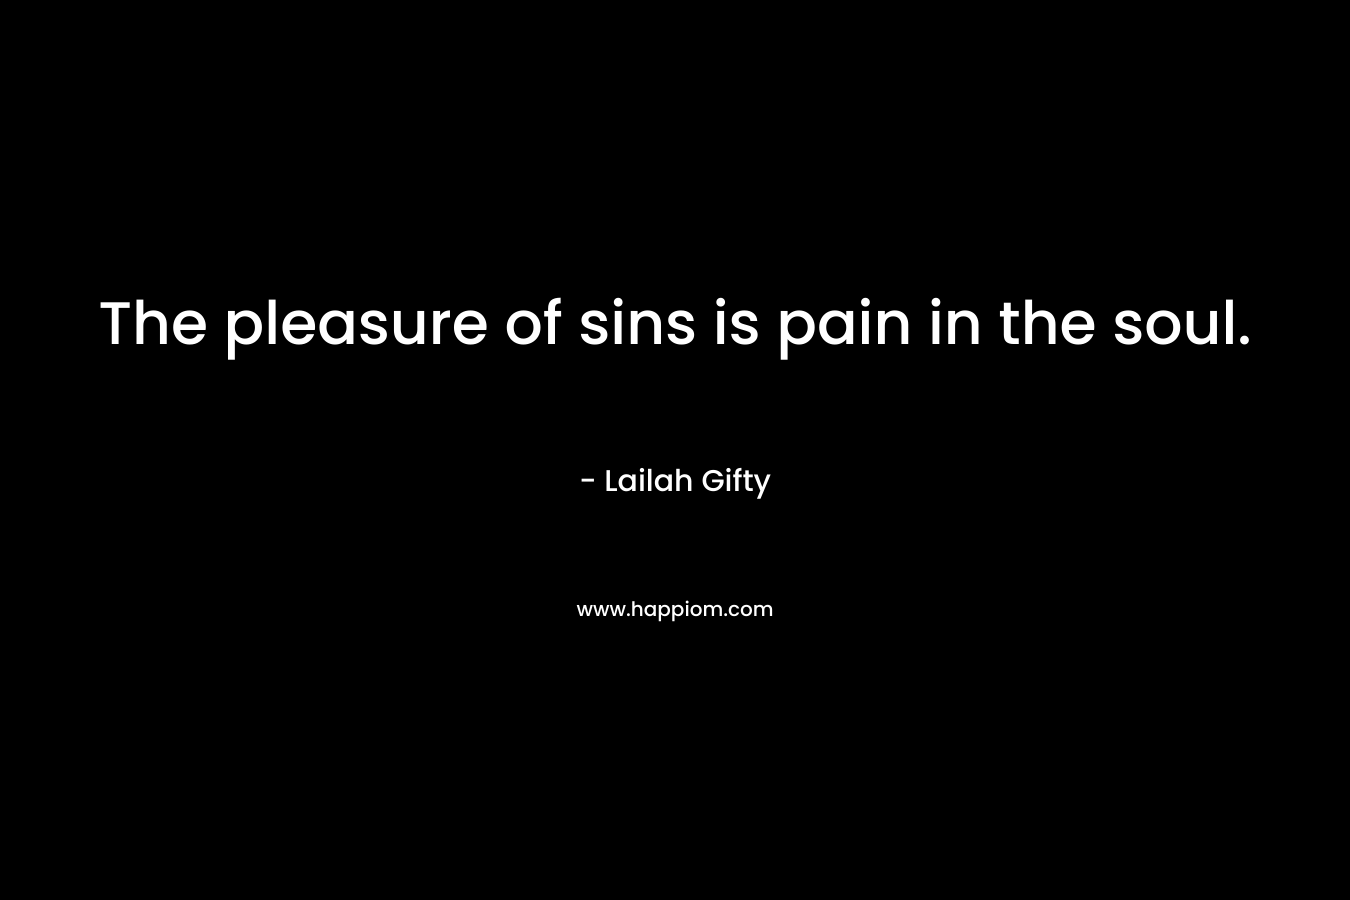 The pleasure of sins is pain in the soul. – Lailah Gifty